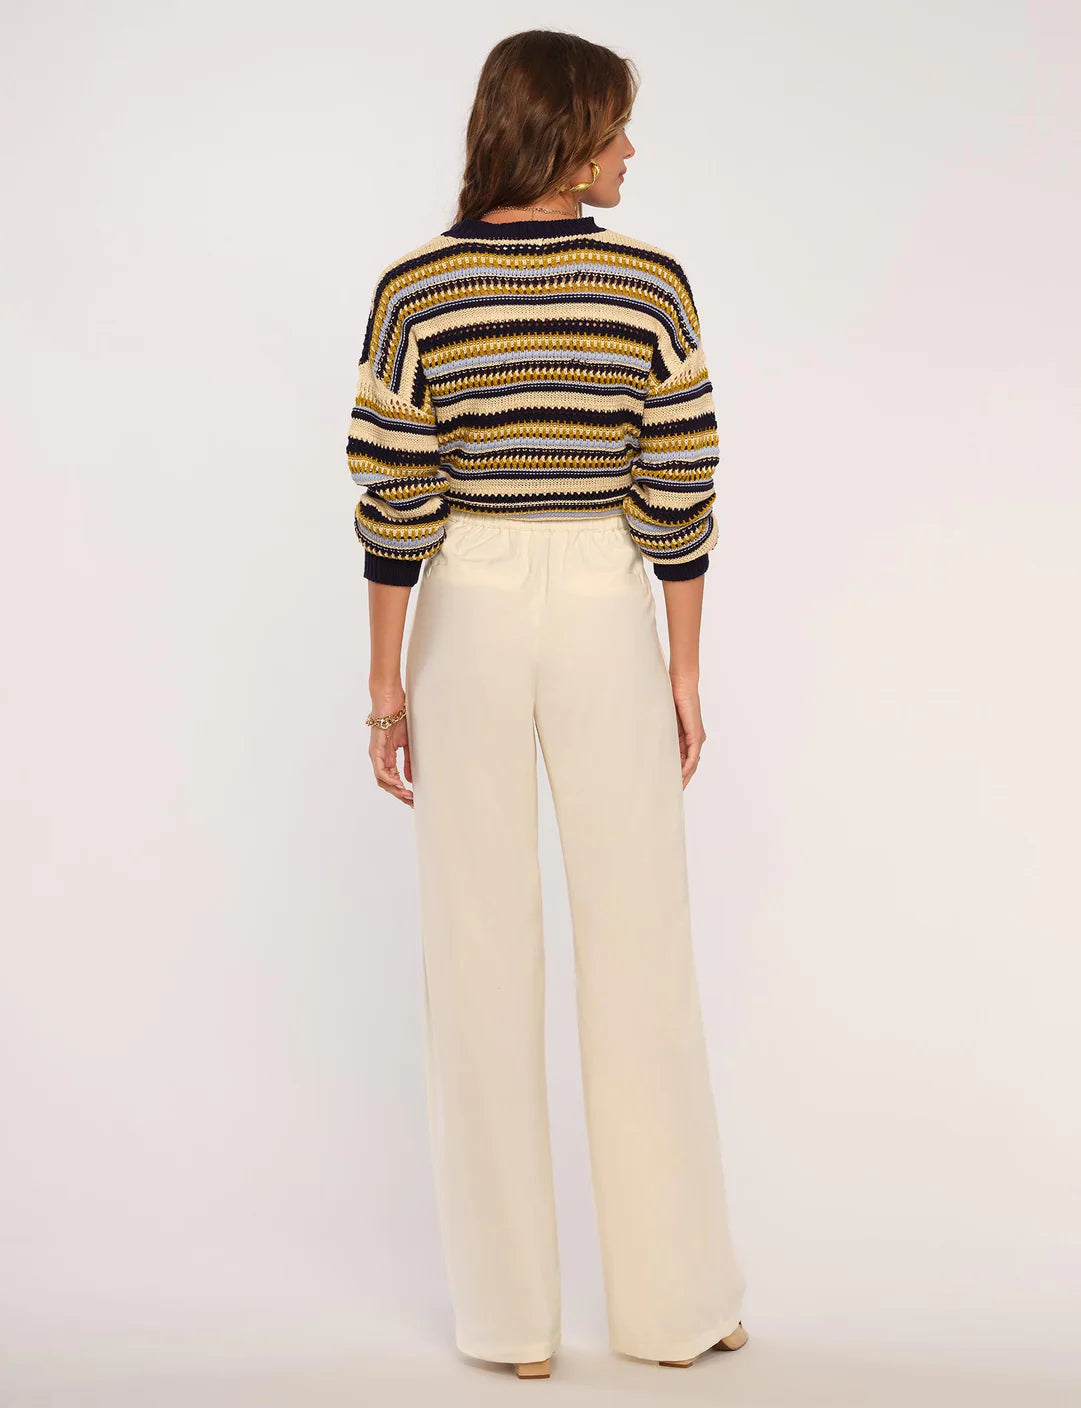 Heartloom Lucca Pant in Ivory